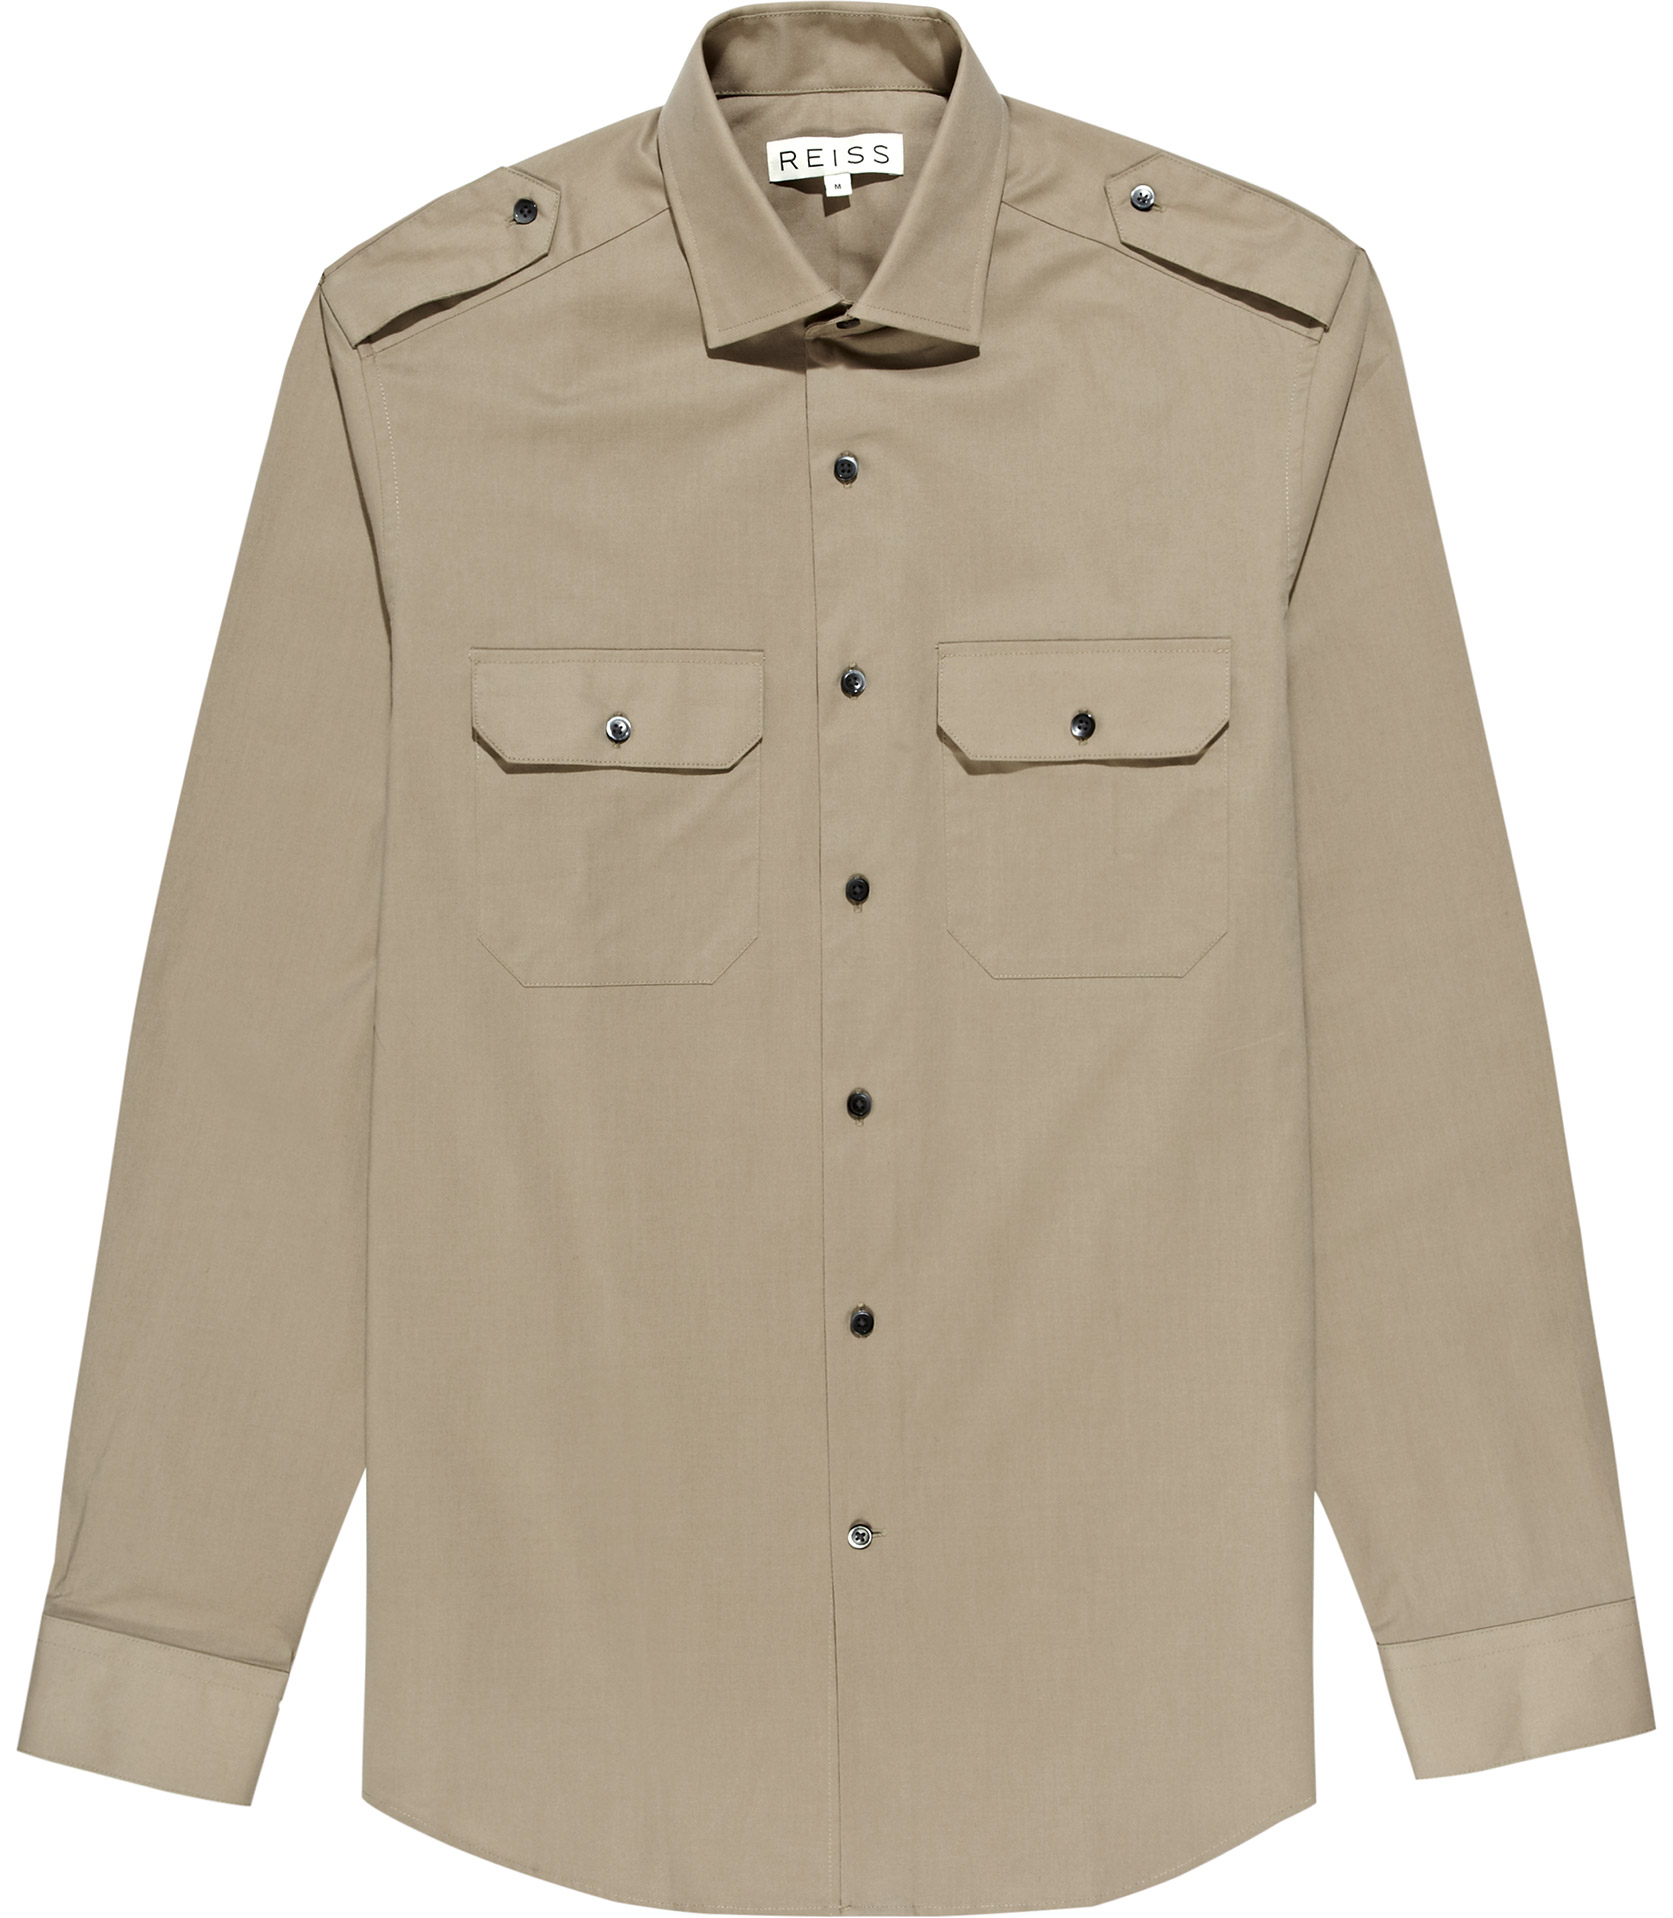 Lyst - Reiss Napolean Military with Epaulette Shirt in Green for Men